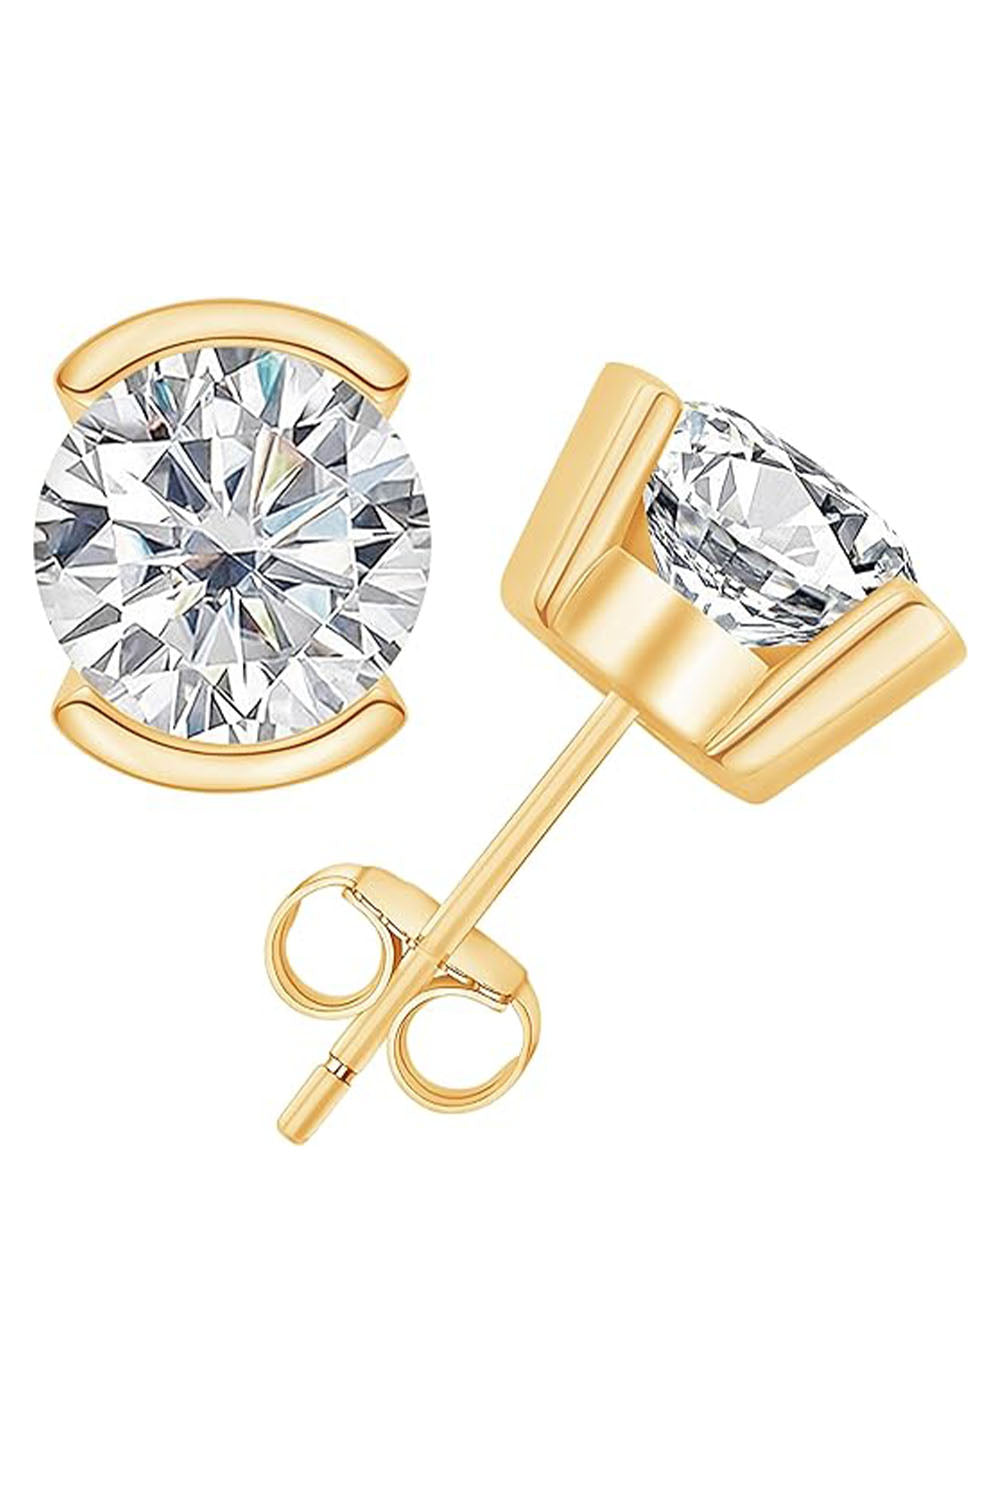 Yellow Gold Color Moissanite Diamond Solitaire Stud Earrings